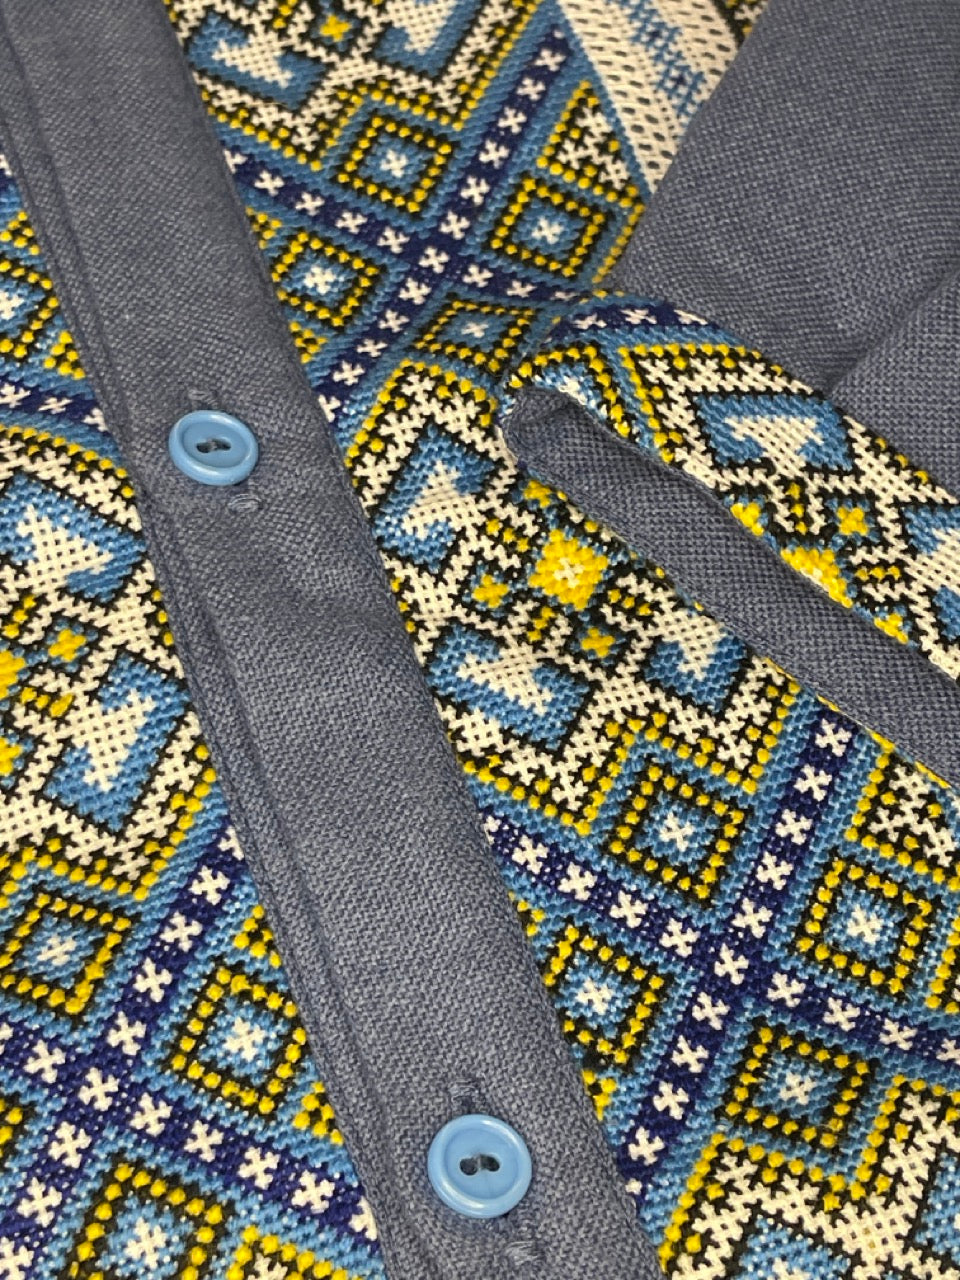 Blue Men's Vyshyvanka with Hand Embroidery